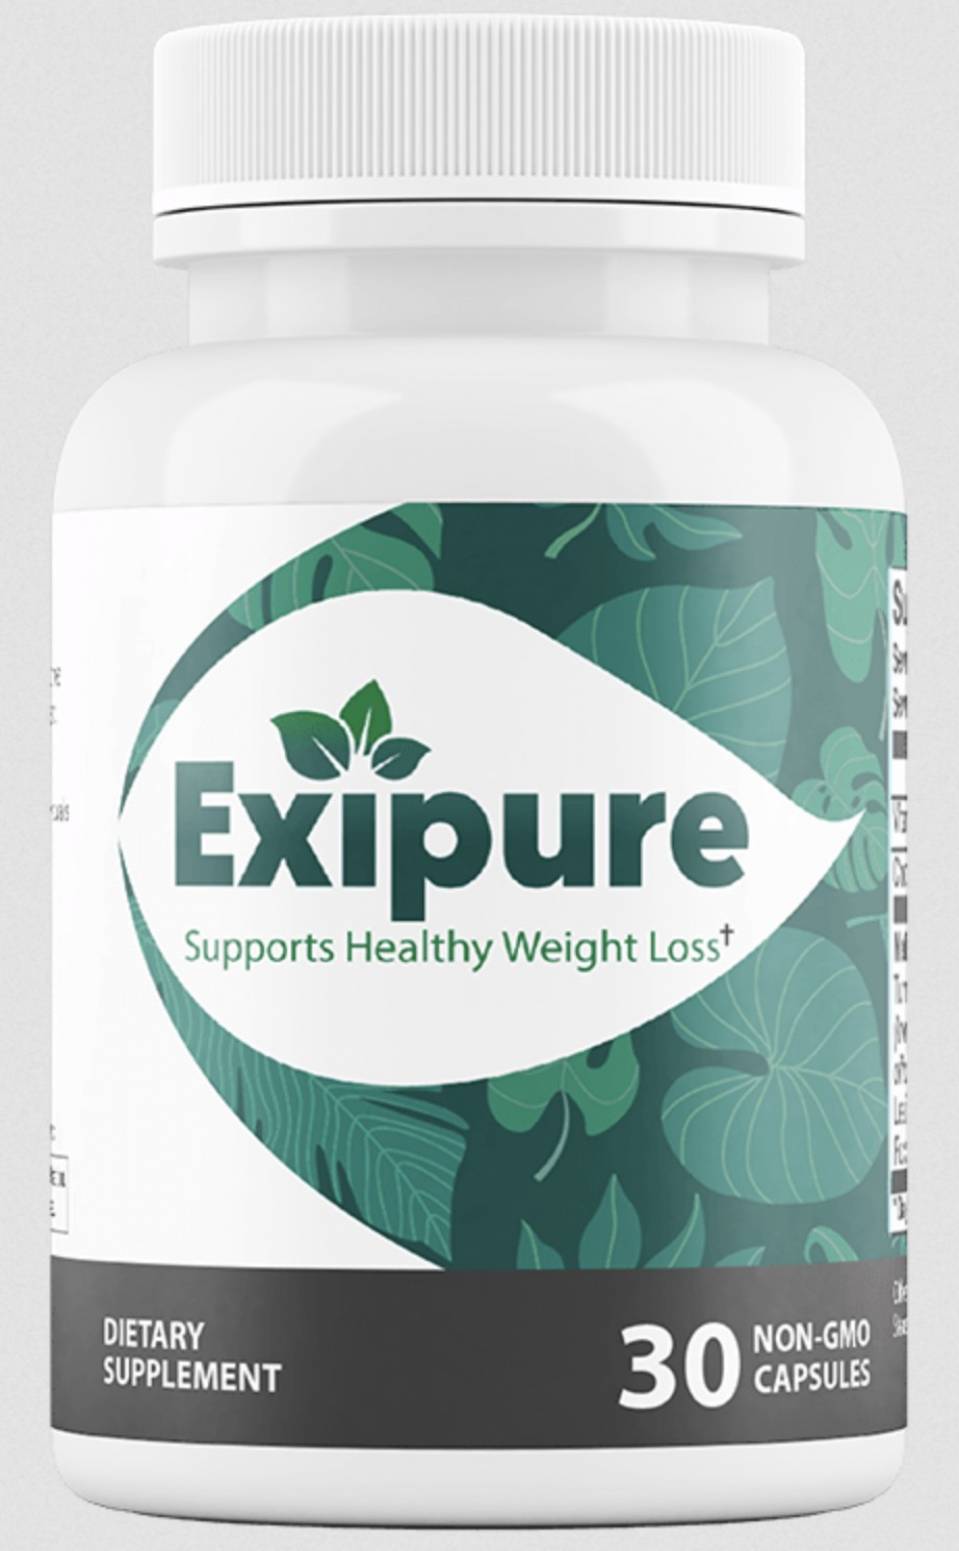 Compare Prices For Exipure